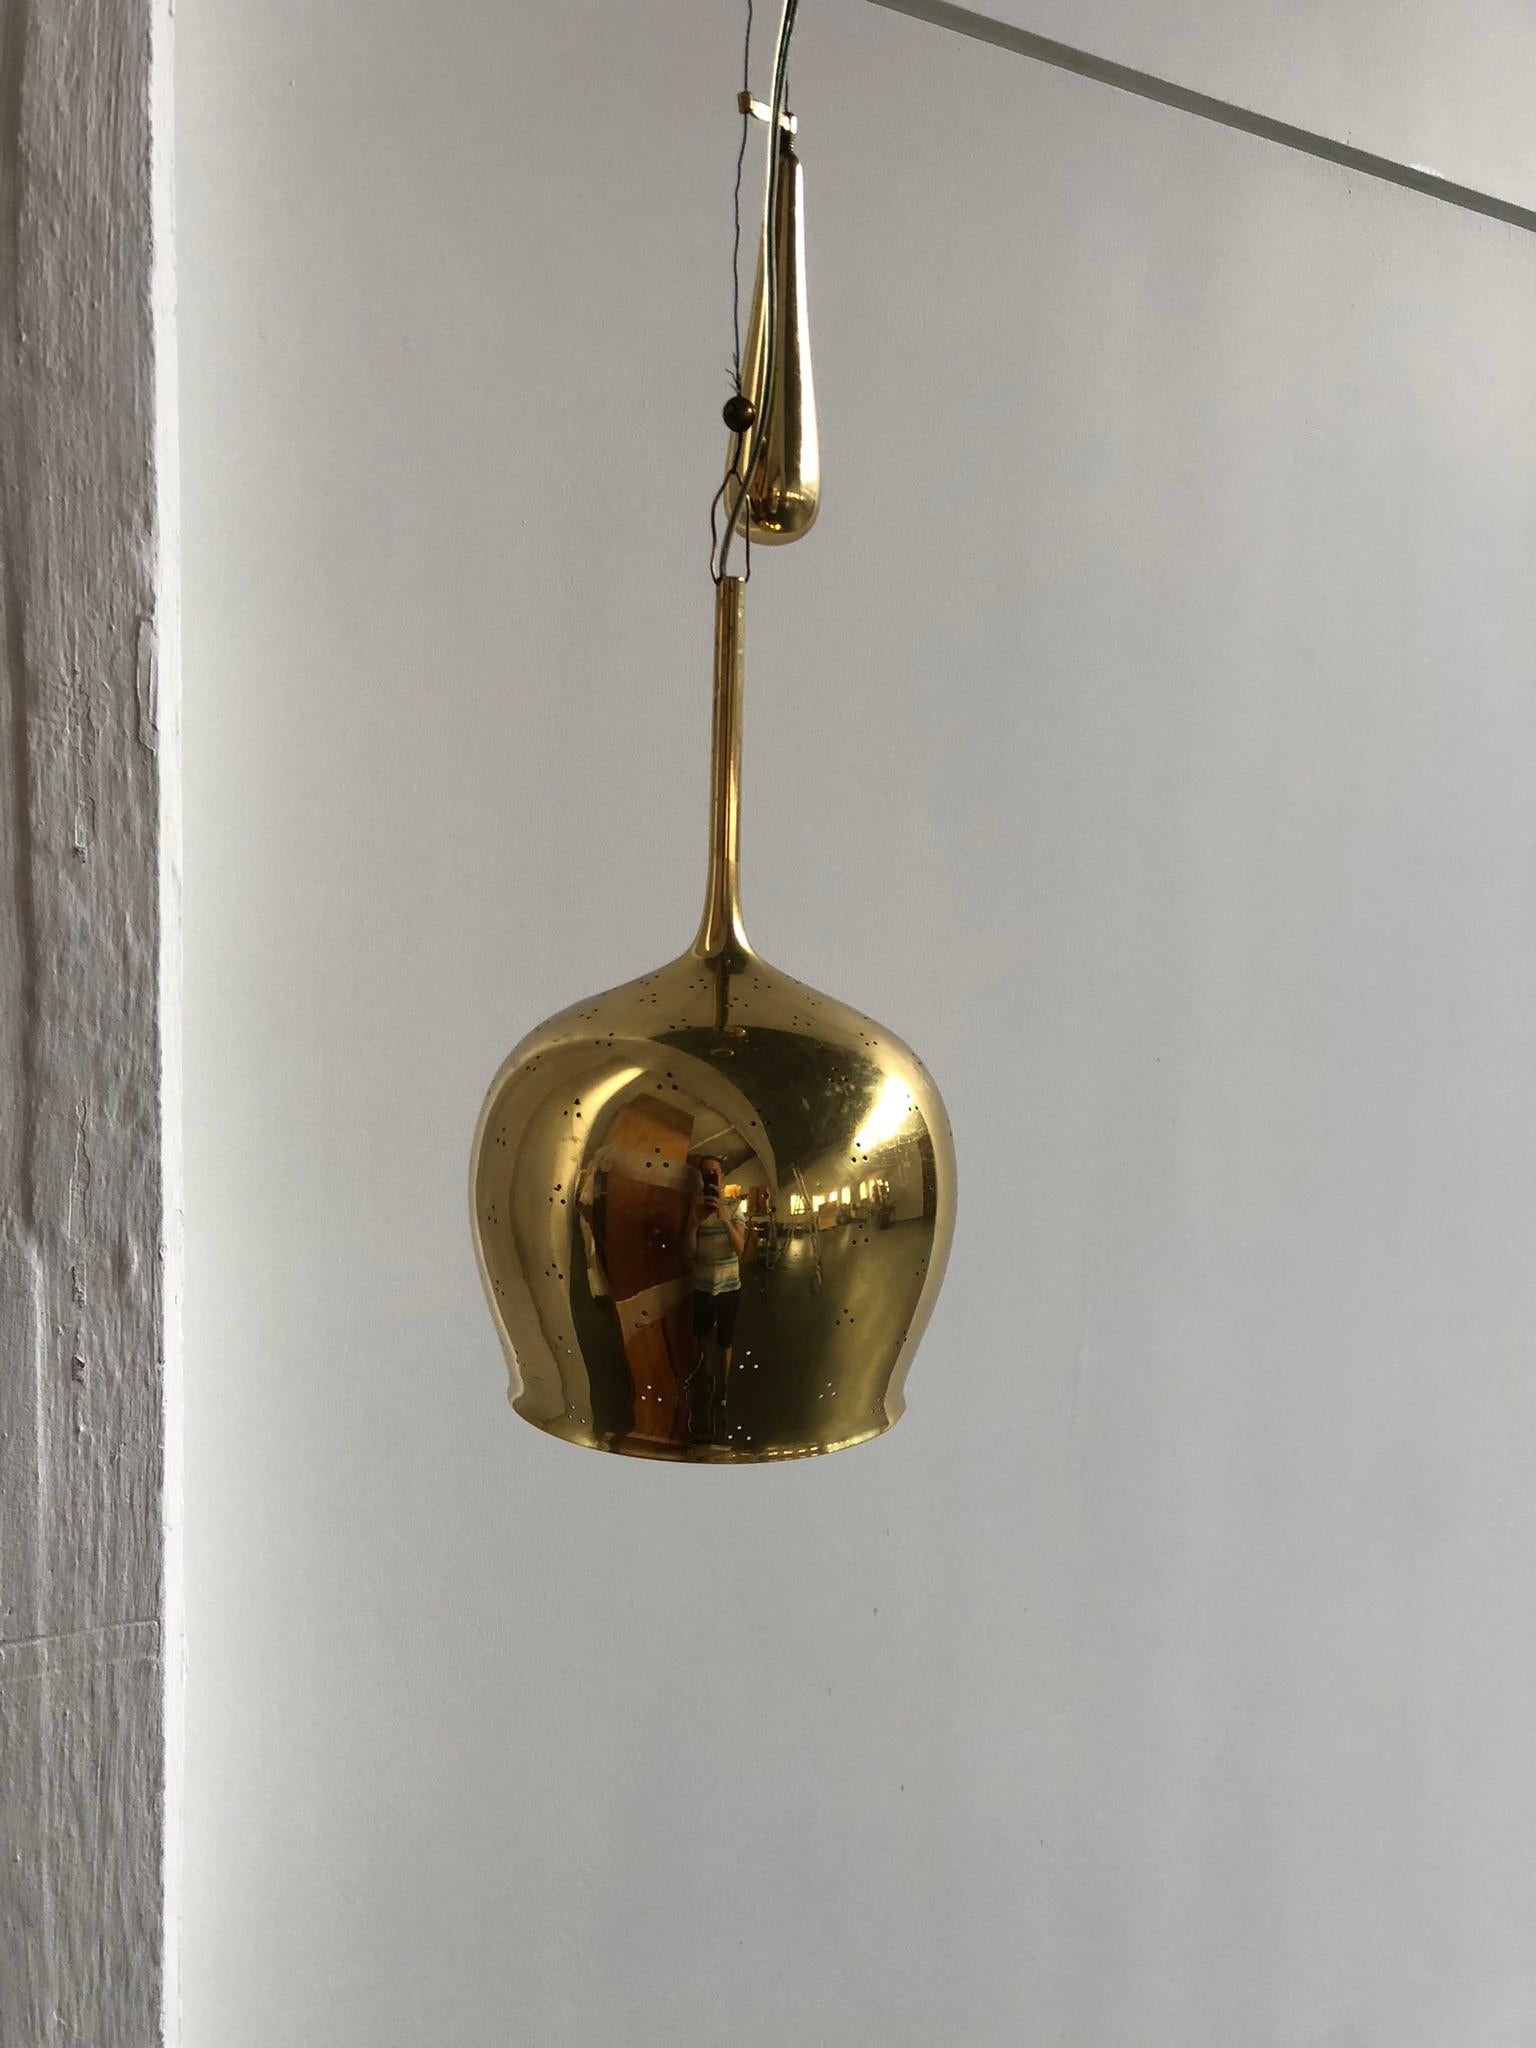 Paavo Tynell pendant in perforated brass with counter weight. Has adjustable height. Made by Taito Oy, Finland, 1950s. Marked from the manufactorer on top part.